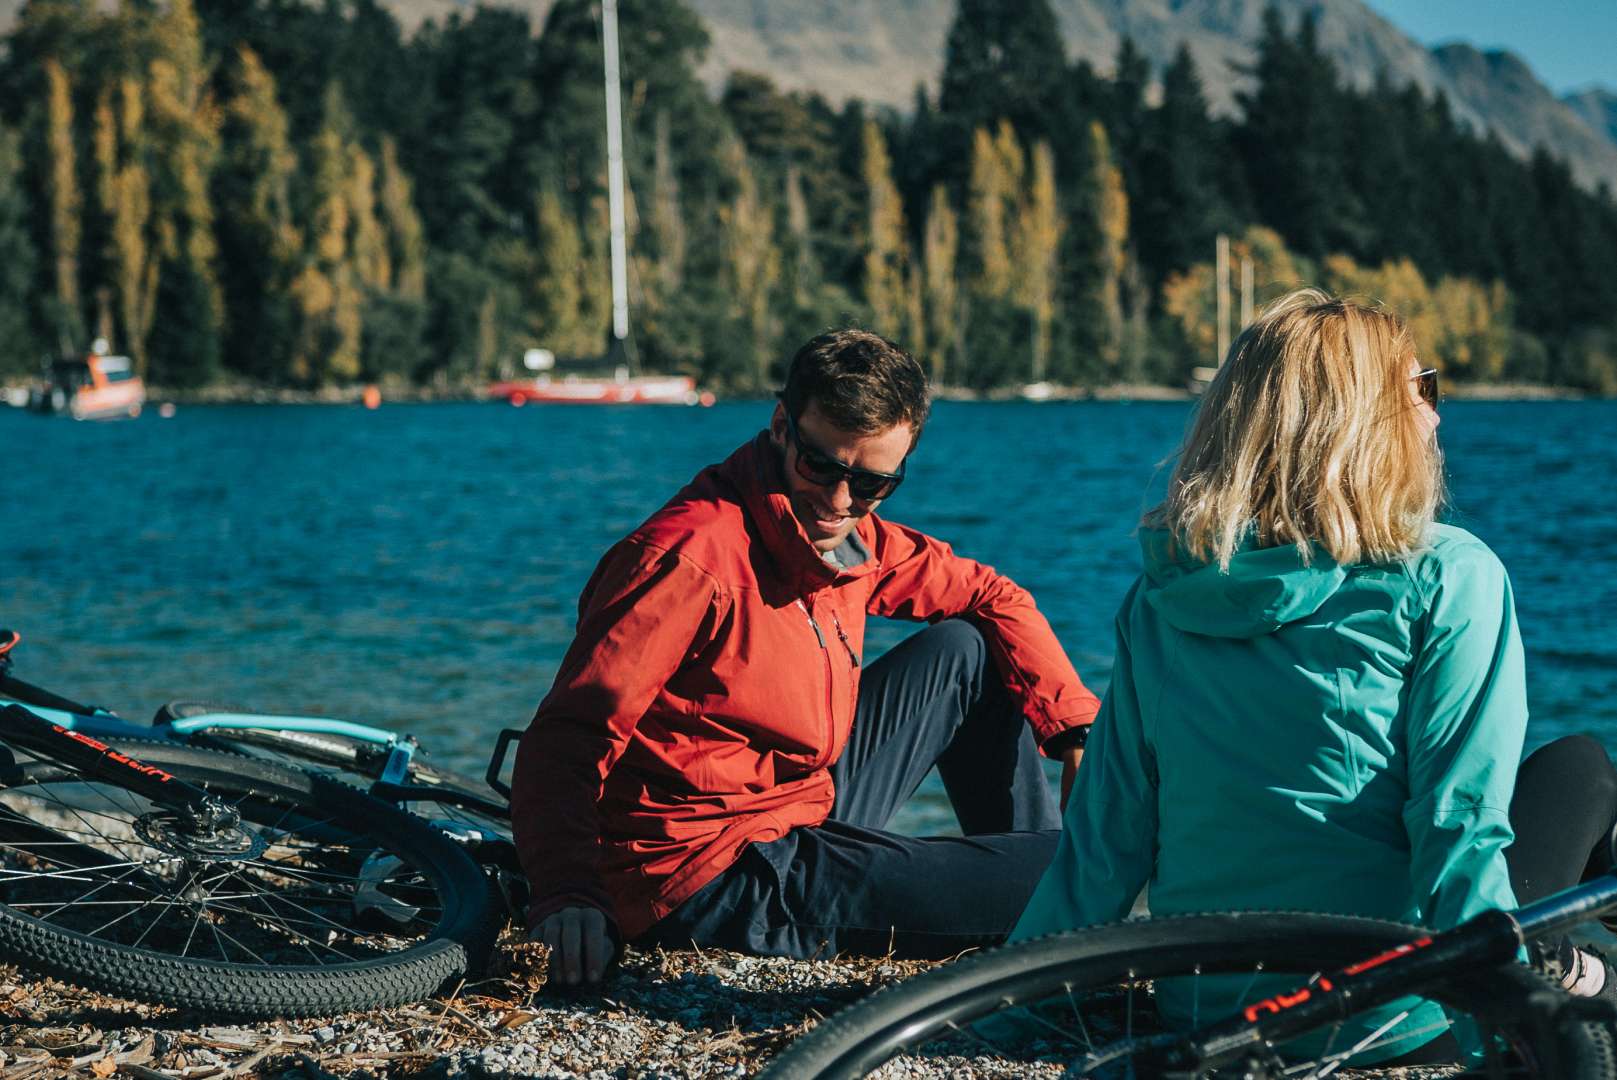 Hire a Bike to Ride at your own pace to your own agenda in Queenstown